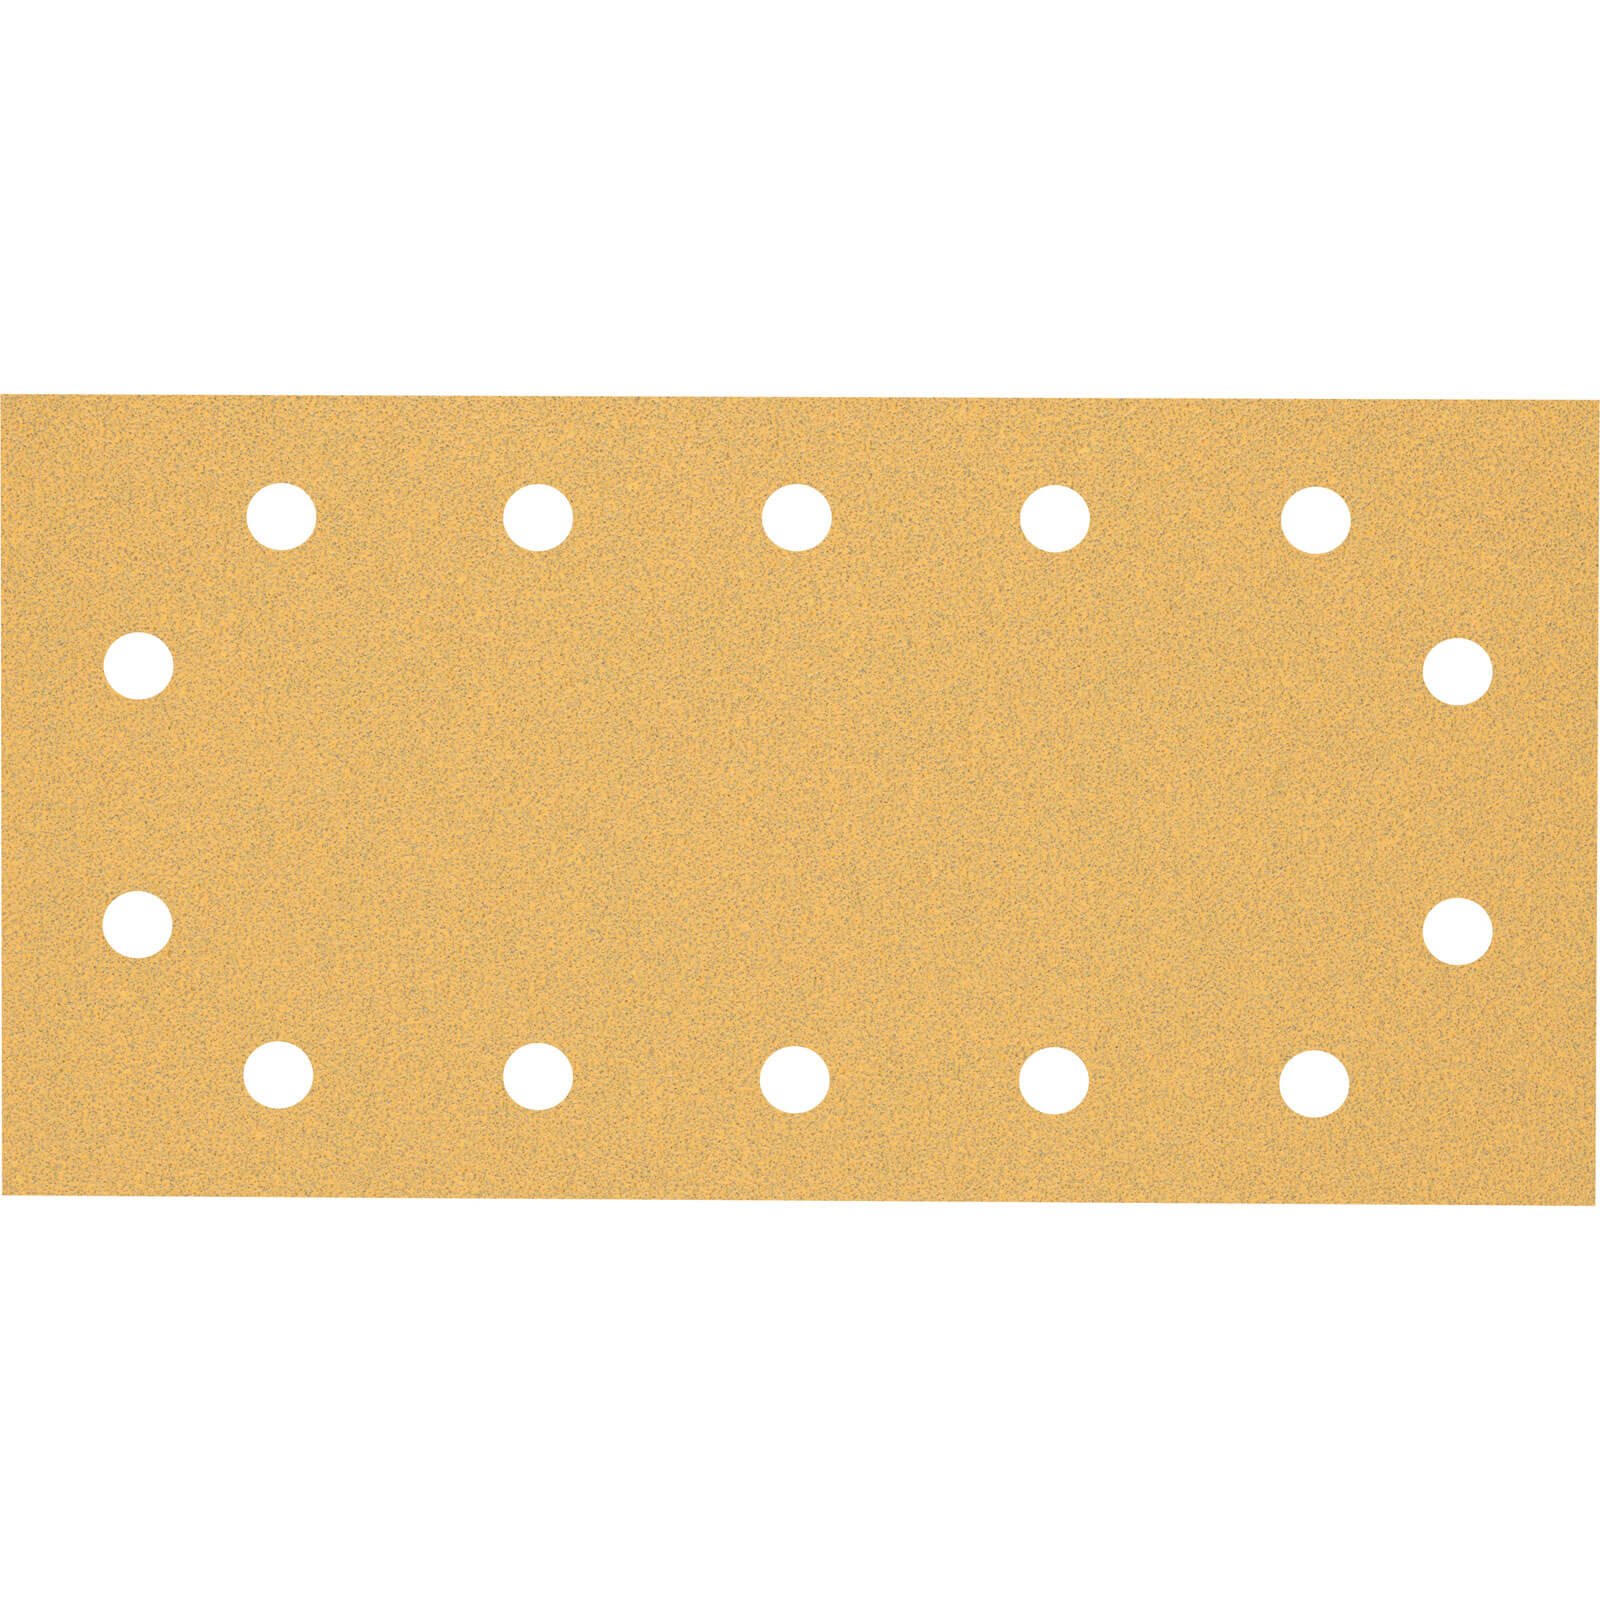 Image of Bosch Expert C470 Punched Hook and Loop 1/2 Sanding Sheets 115mm x 230mm 80g Pack of 50